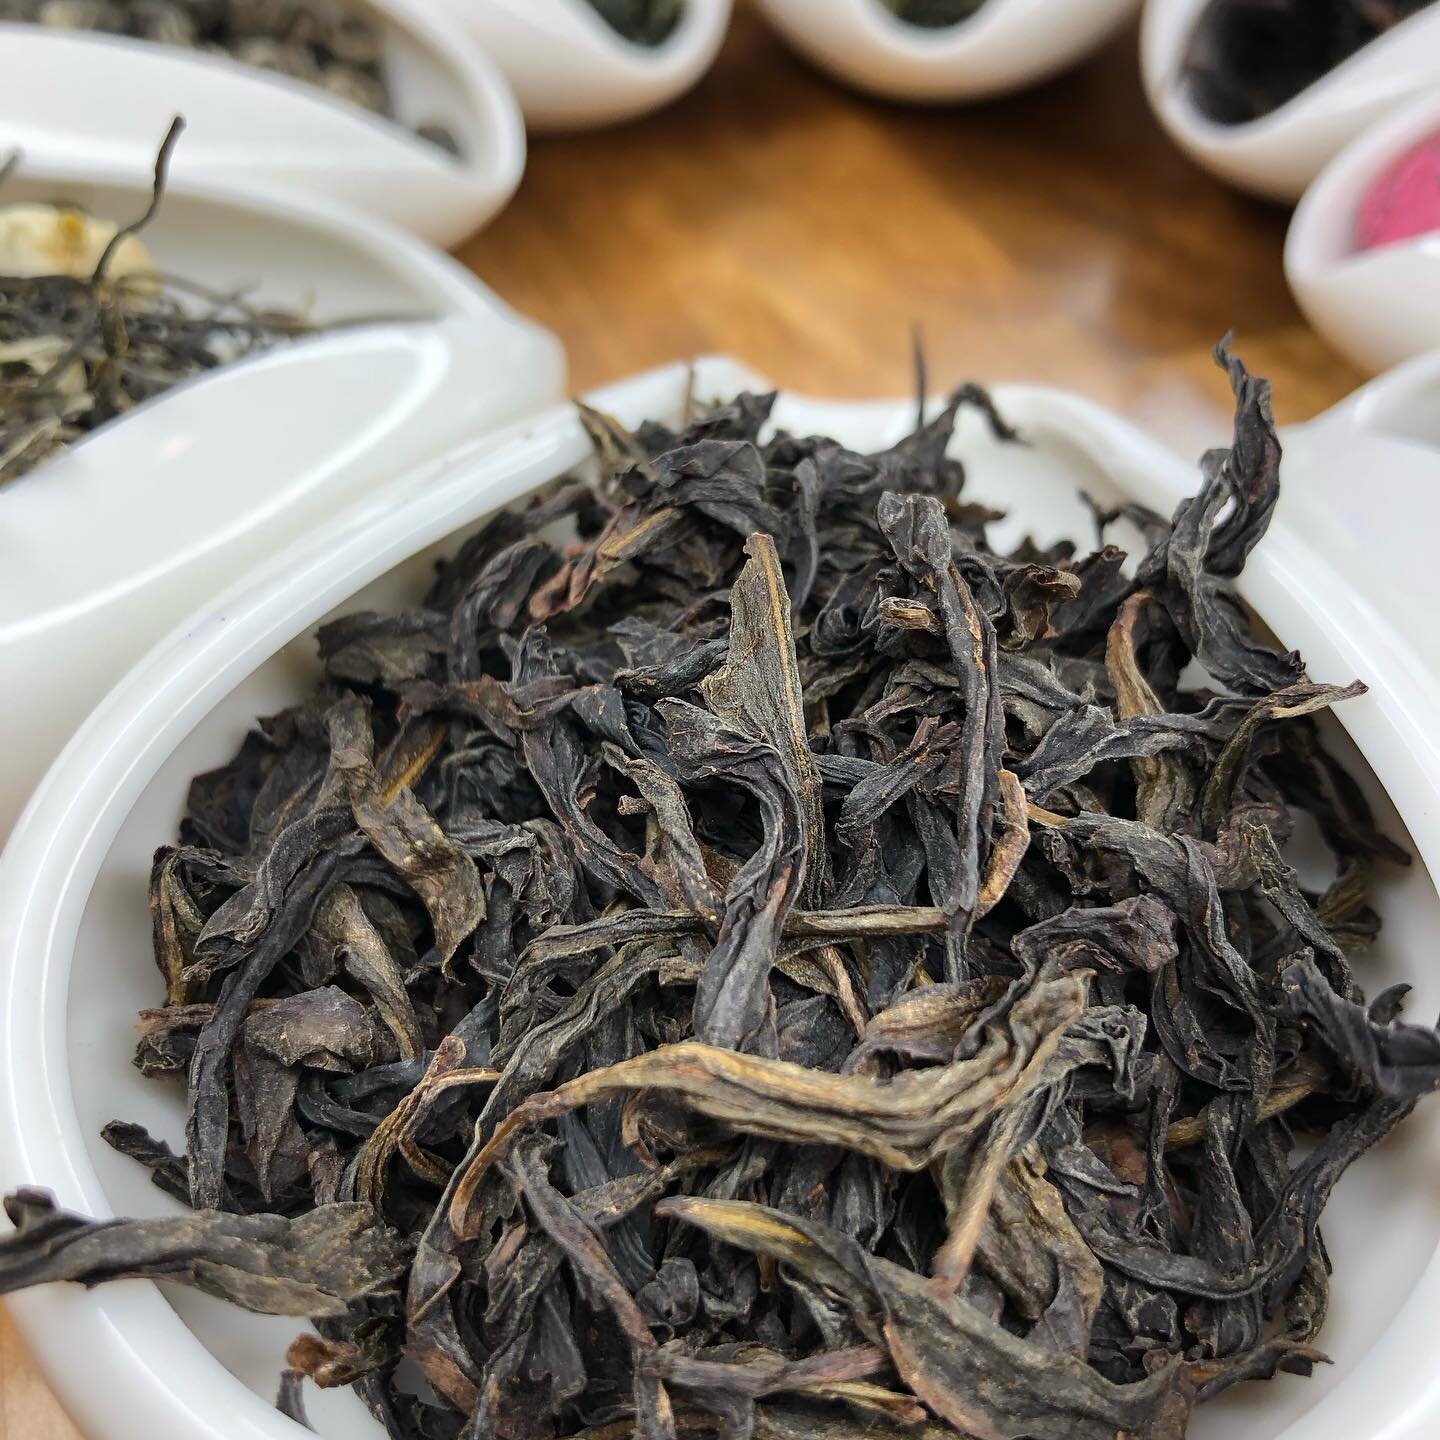 Phoenix Villiage &ldquo;Mi Xiang&rdquo; Shui Xian Oolong Tea. A lovely spring harvest from the Phoenix Village in Wu Yi mountain area. Shui Xian is an older tea varietal with a bolder taste. The plants are around 60 years old and left to grow natural